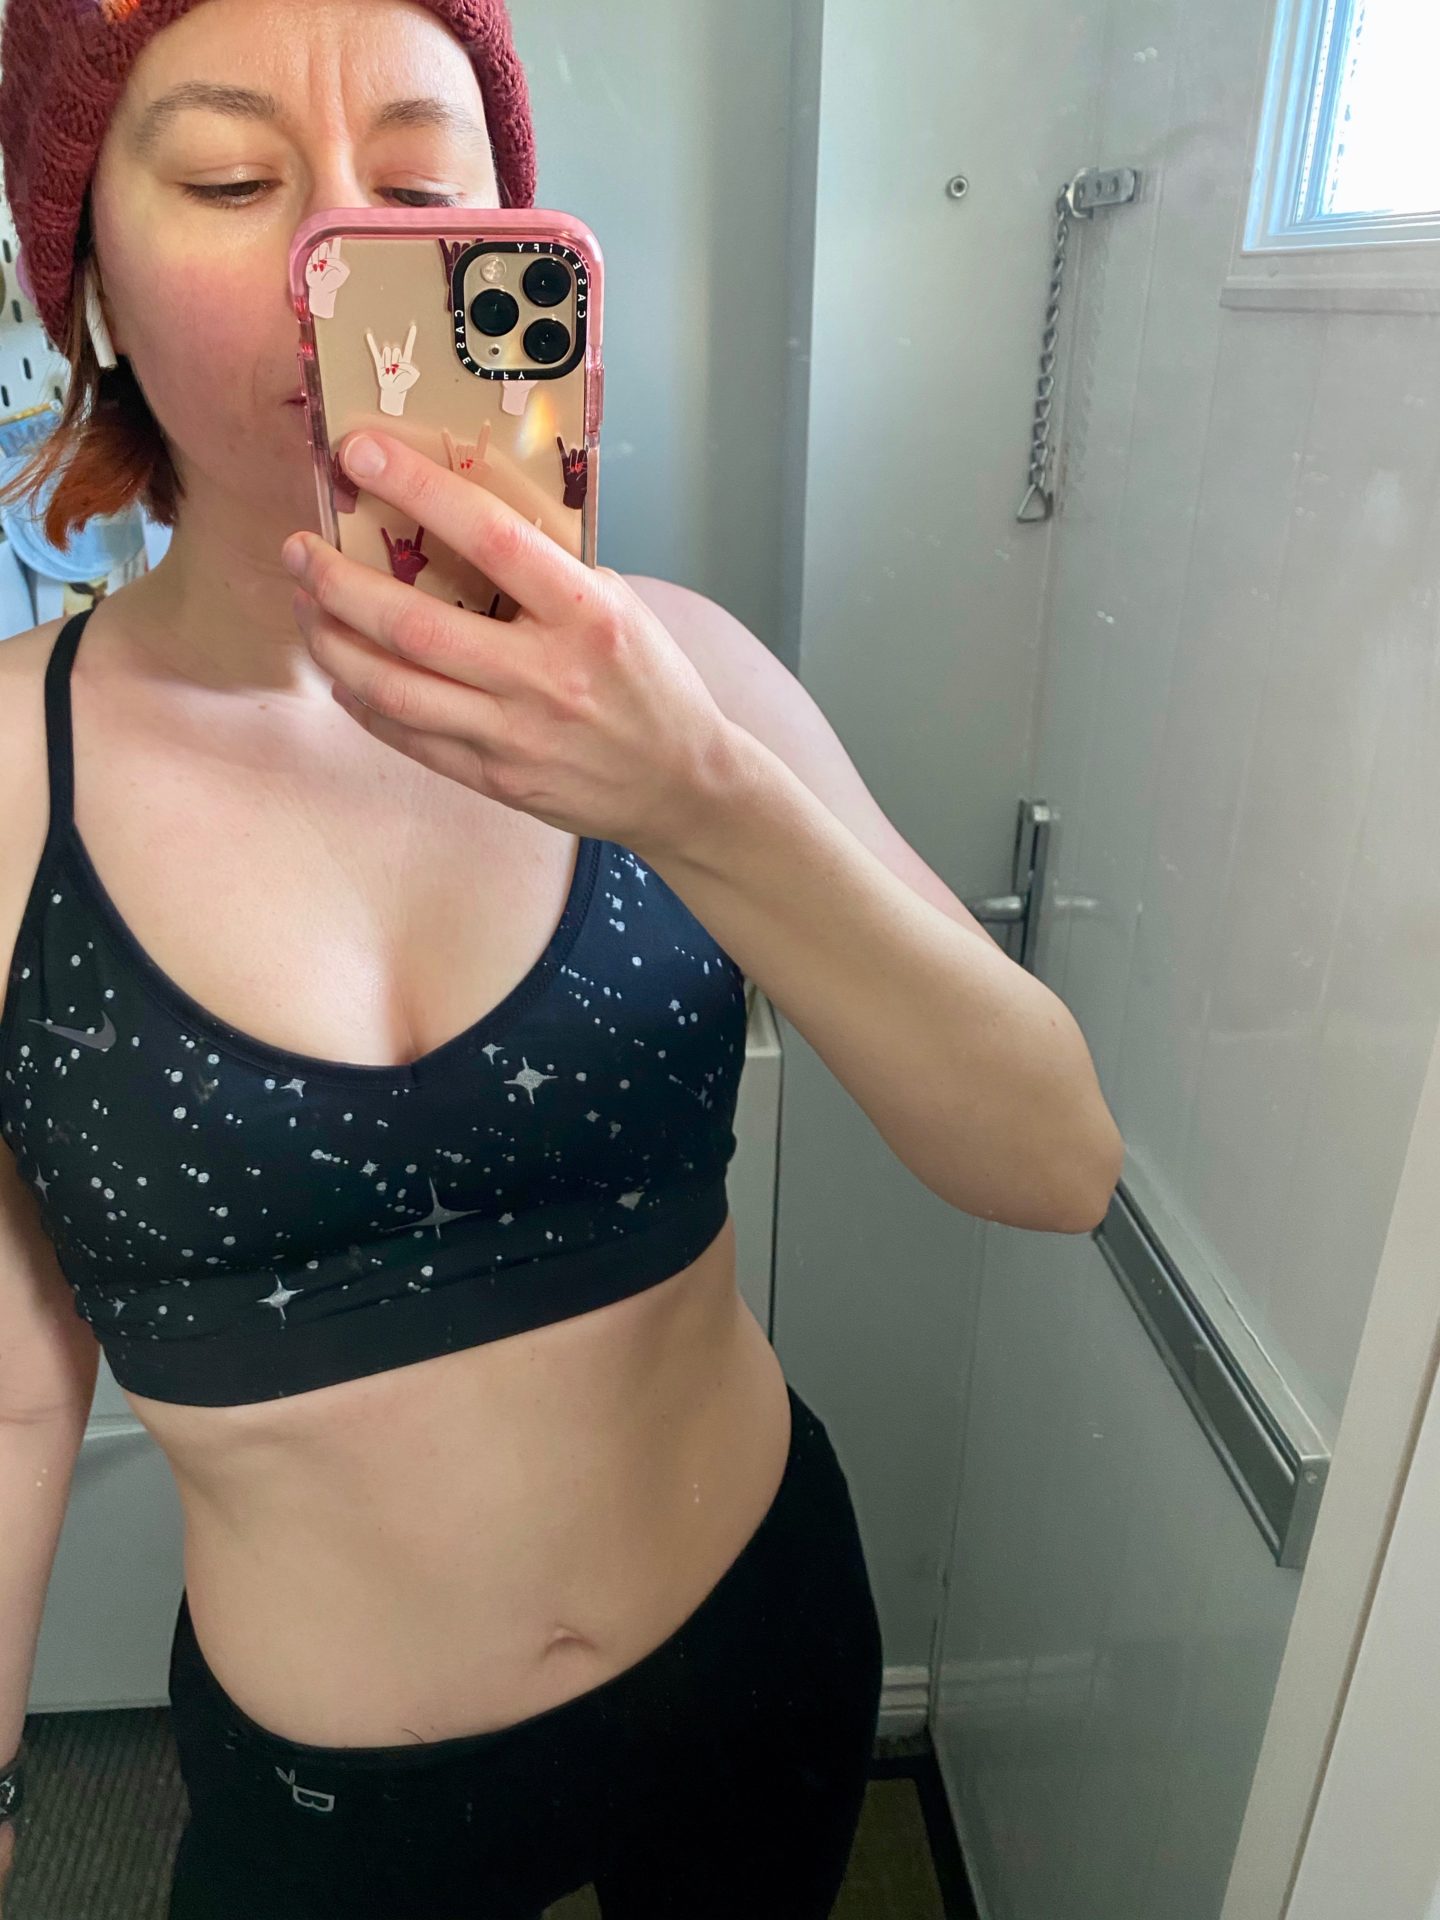 A woman in a woolie hat and crop top takes a selfie in a sports bra and leggings